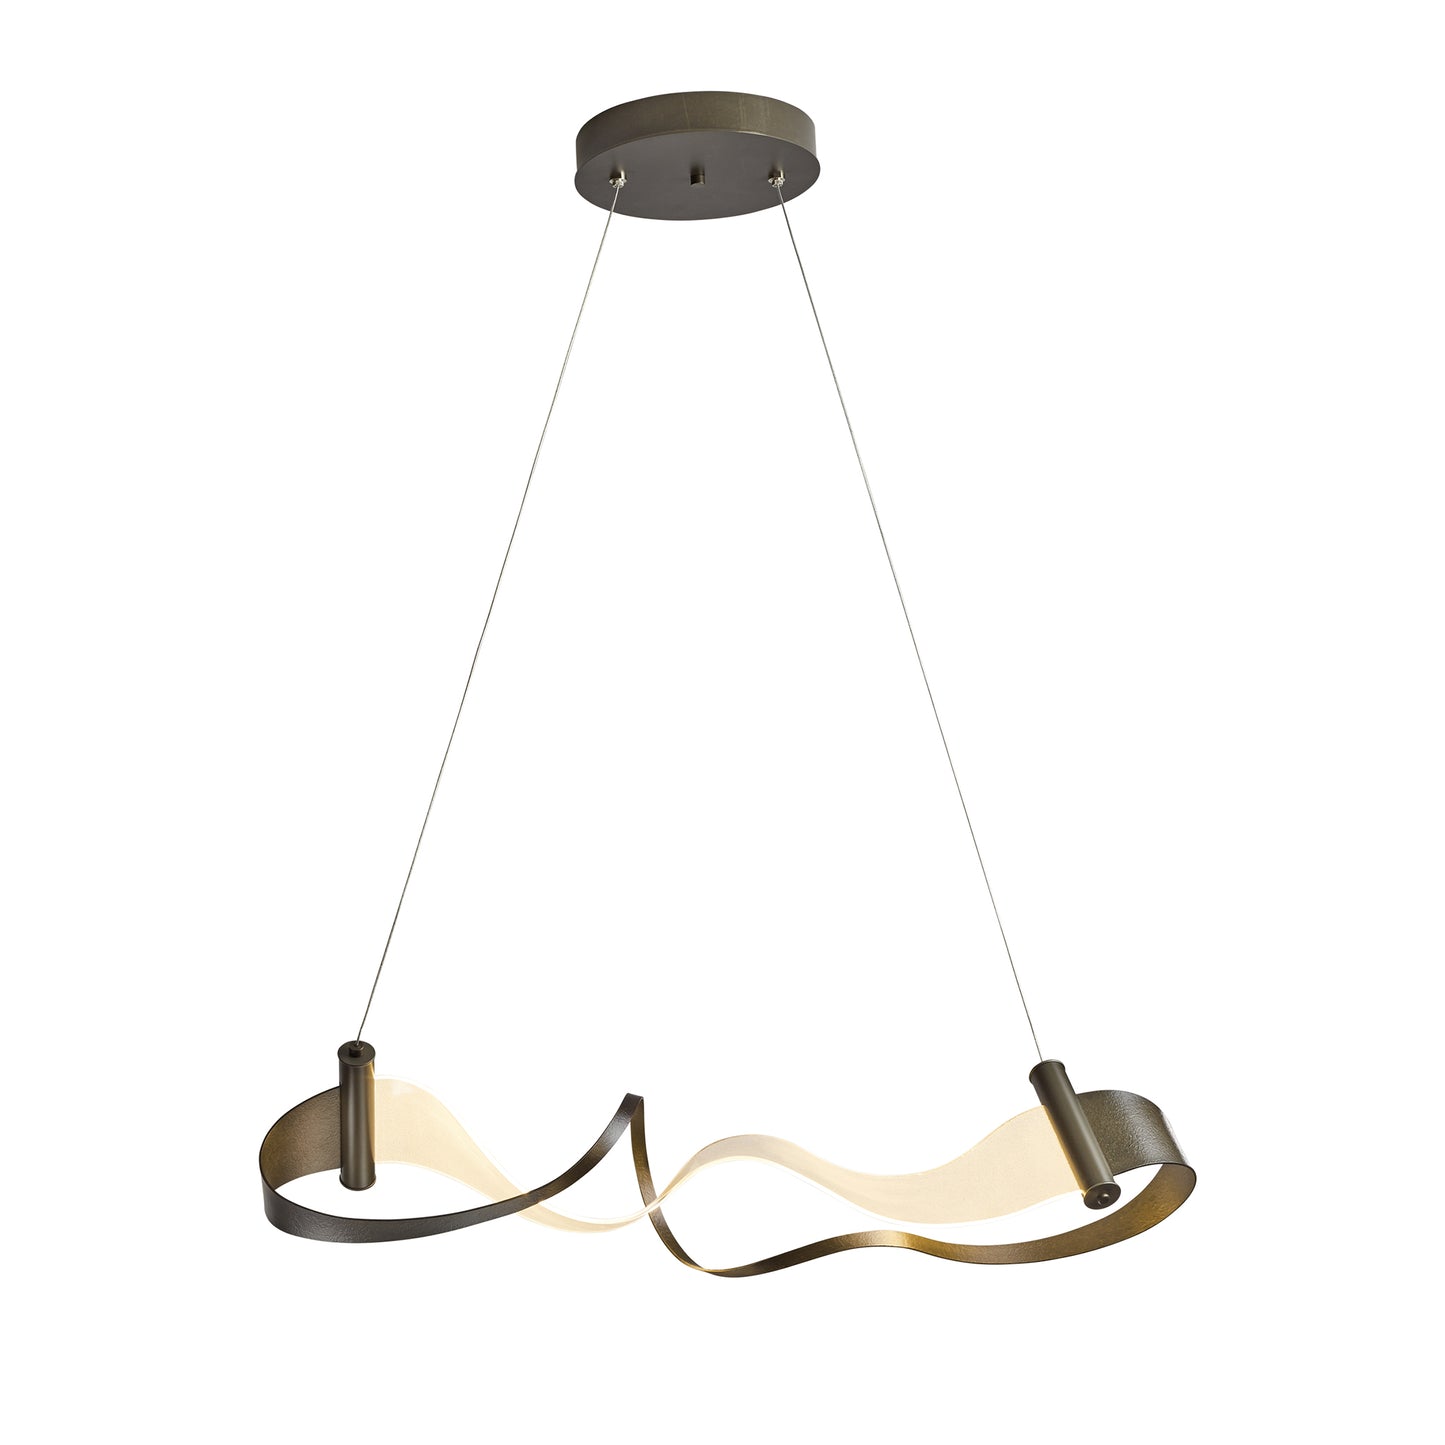 A handcrafted pendant light with a wavy shape, inspired by the Hubbardton Forge Zephyr LED Pendant.